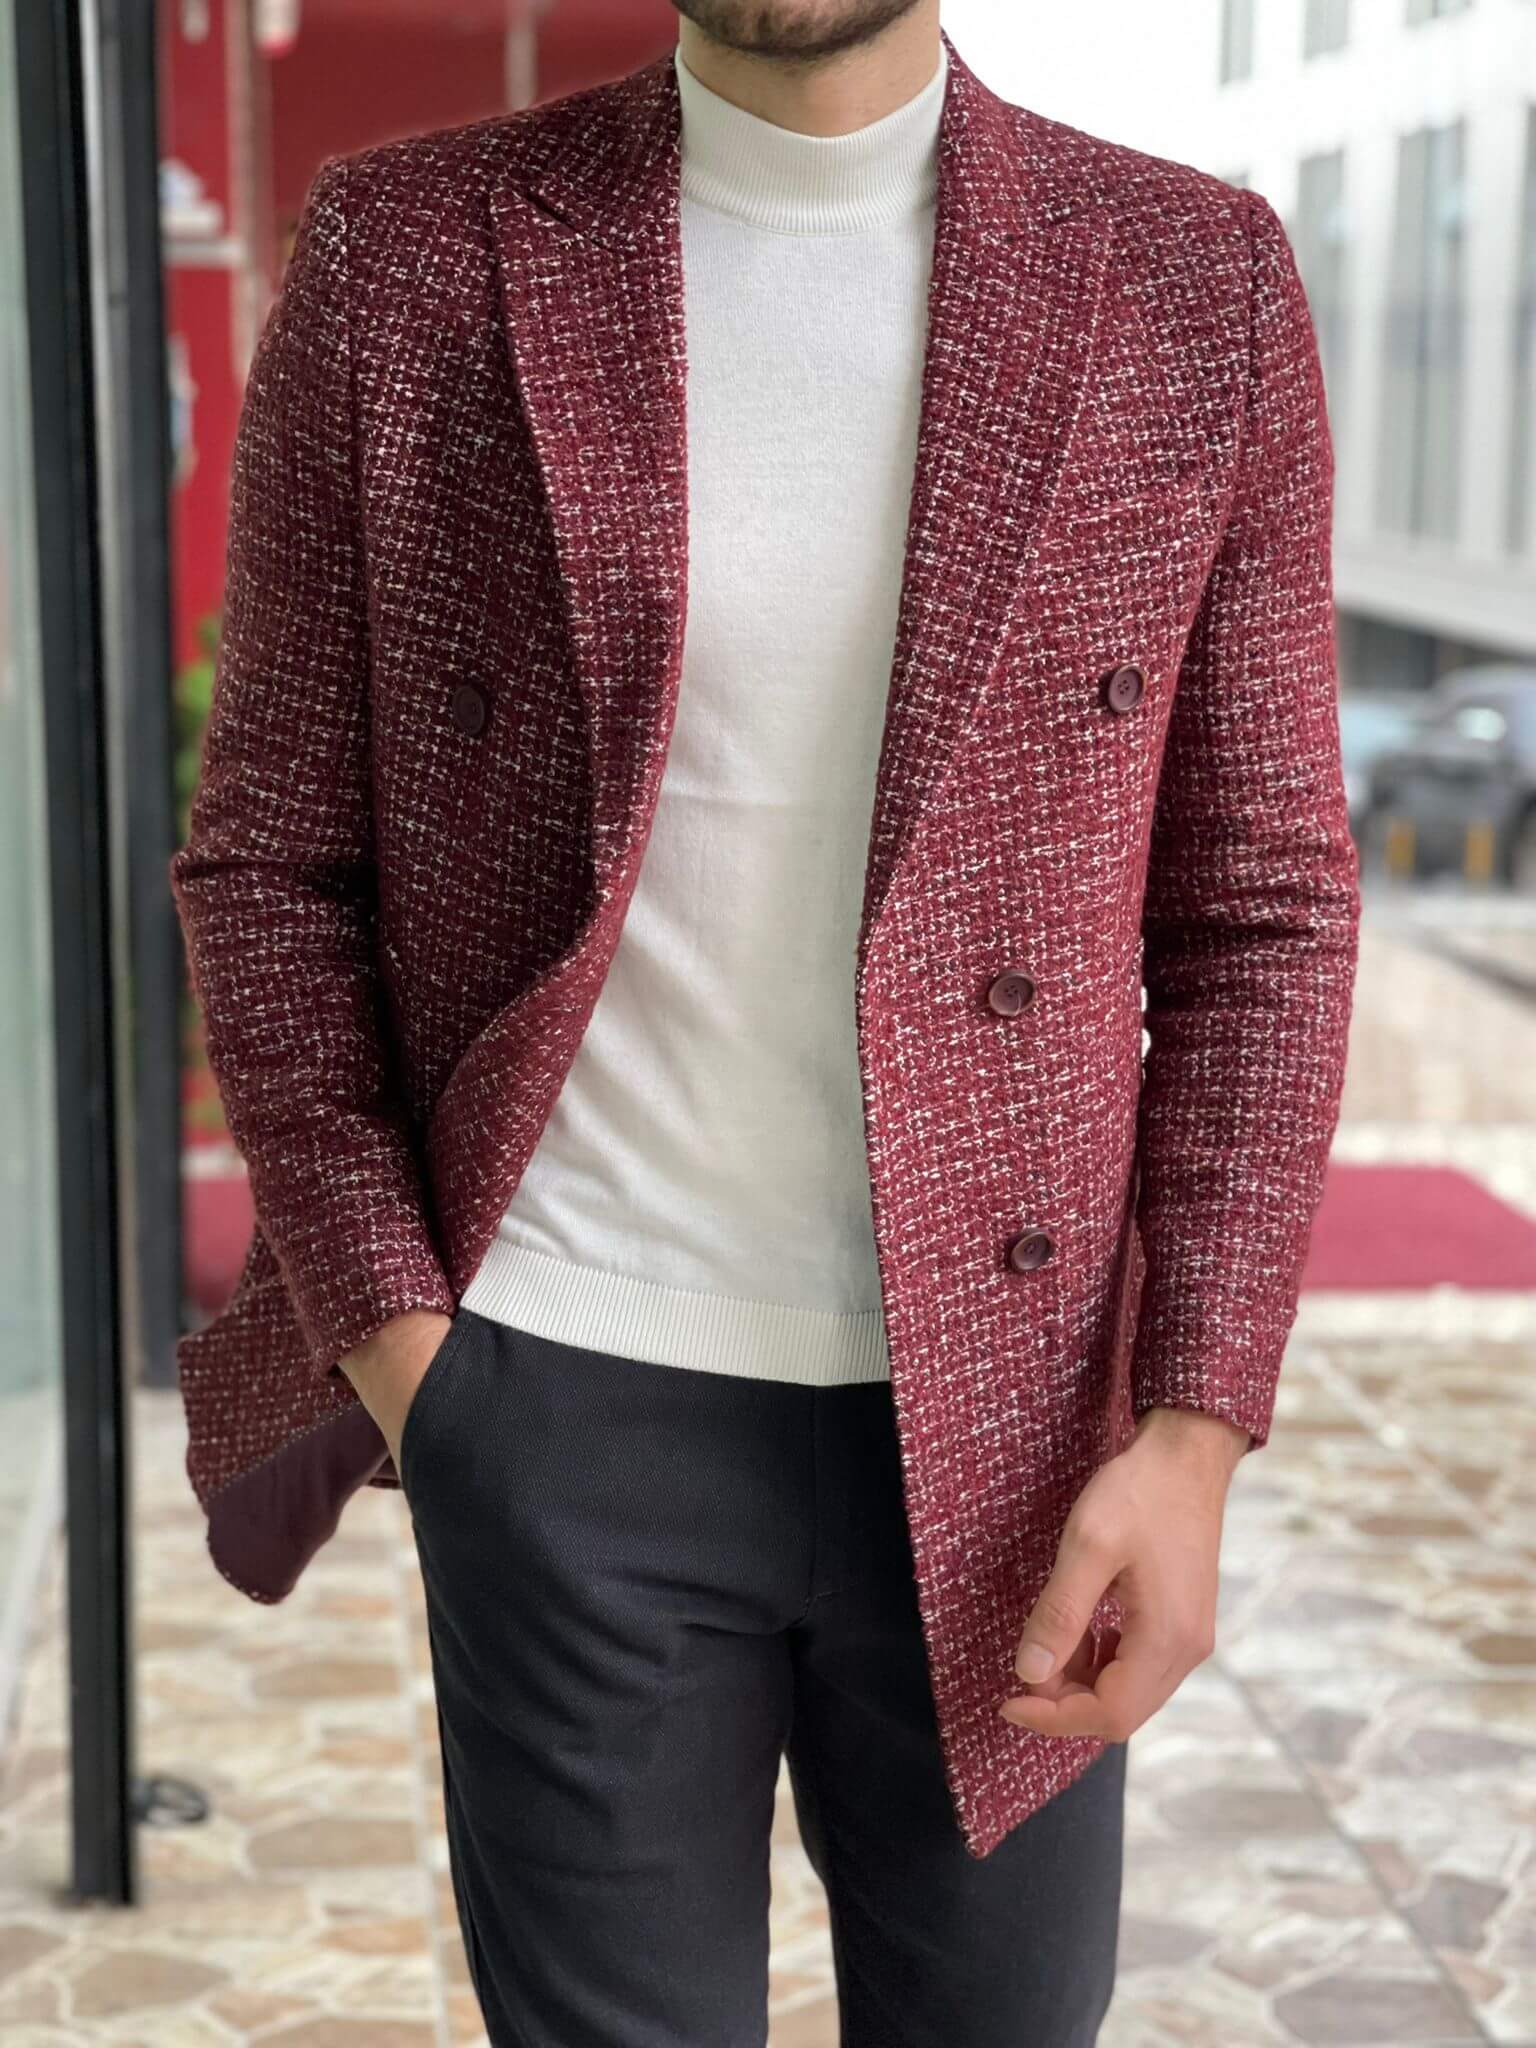 Claret red coat with a timeless double-breasted design